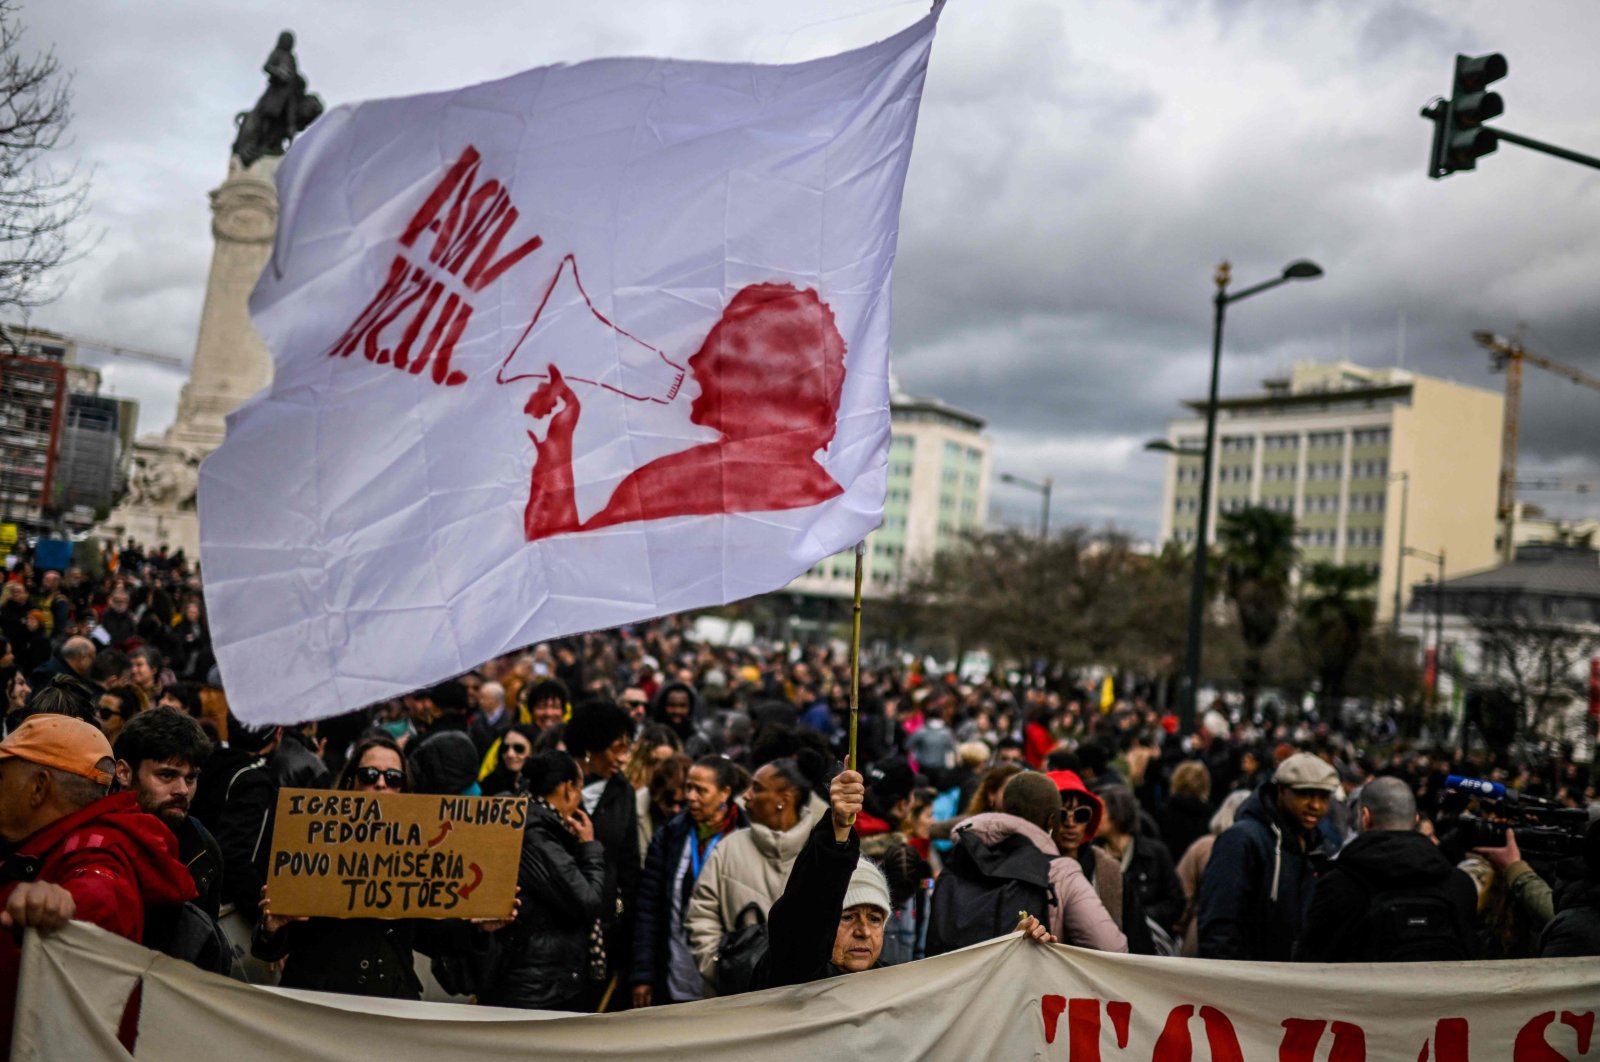 Protesters gather at Marques do Pombal square during a protest against the rise of the cost of living, and for housing rights in Lisbon, Portugal, Feb. 25, 2023. (AFP Photo)